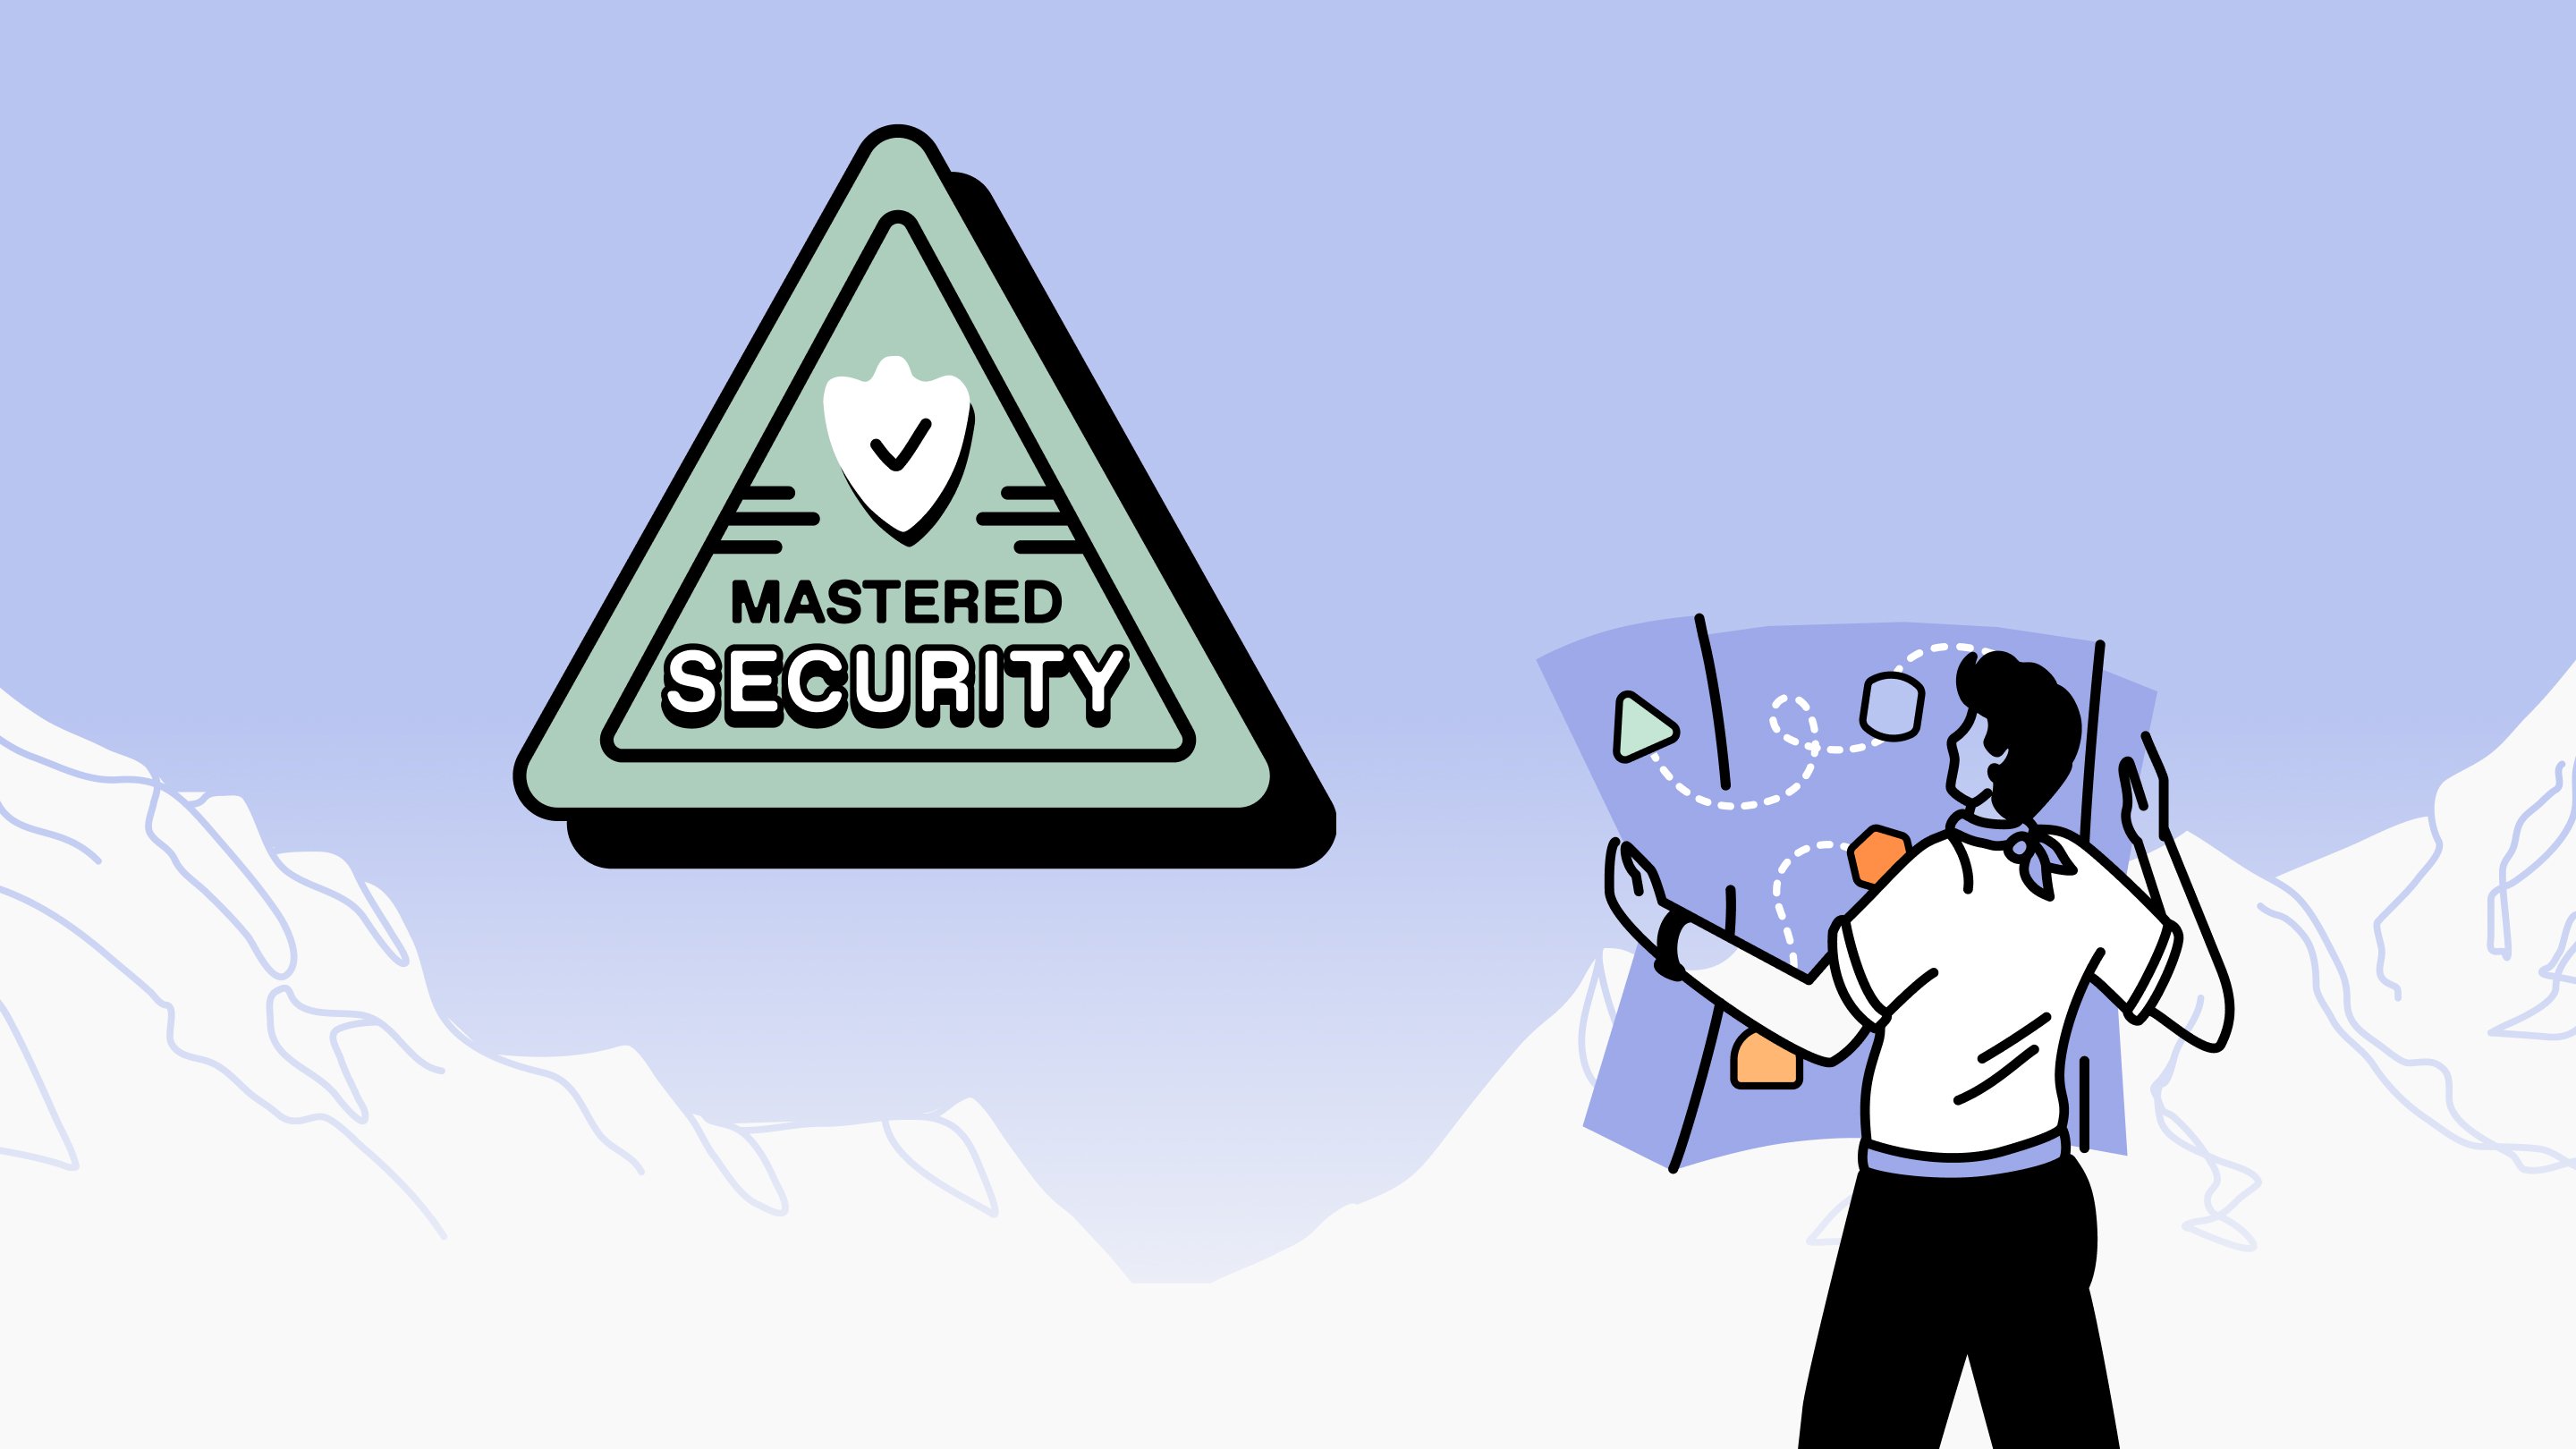 Featured security course